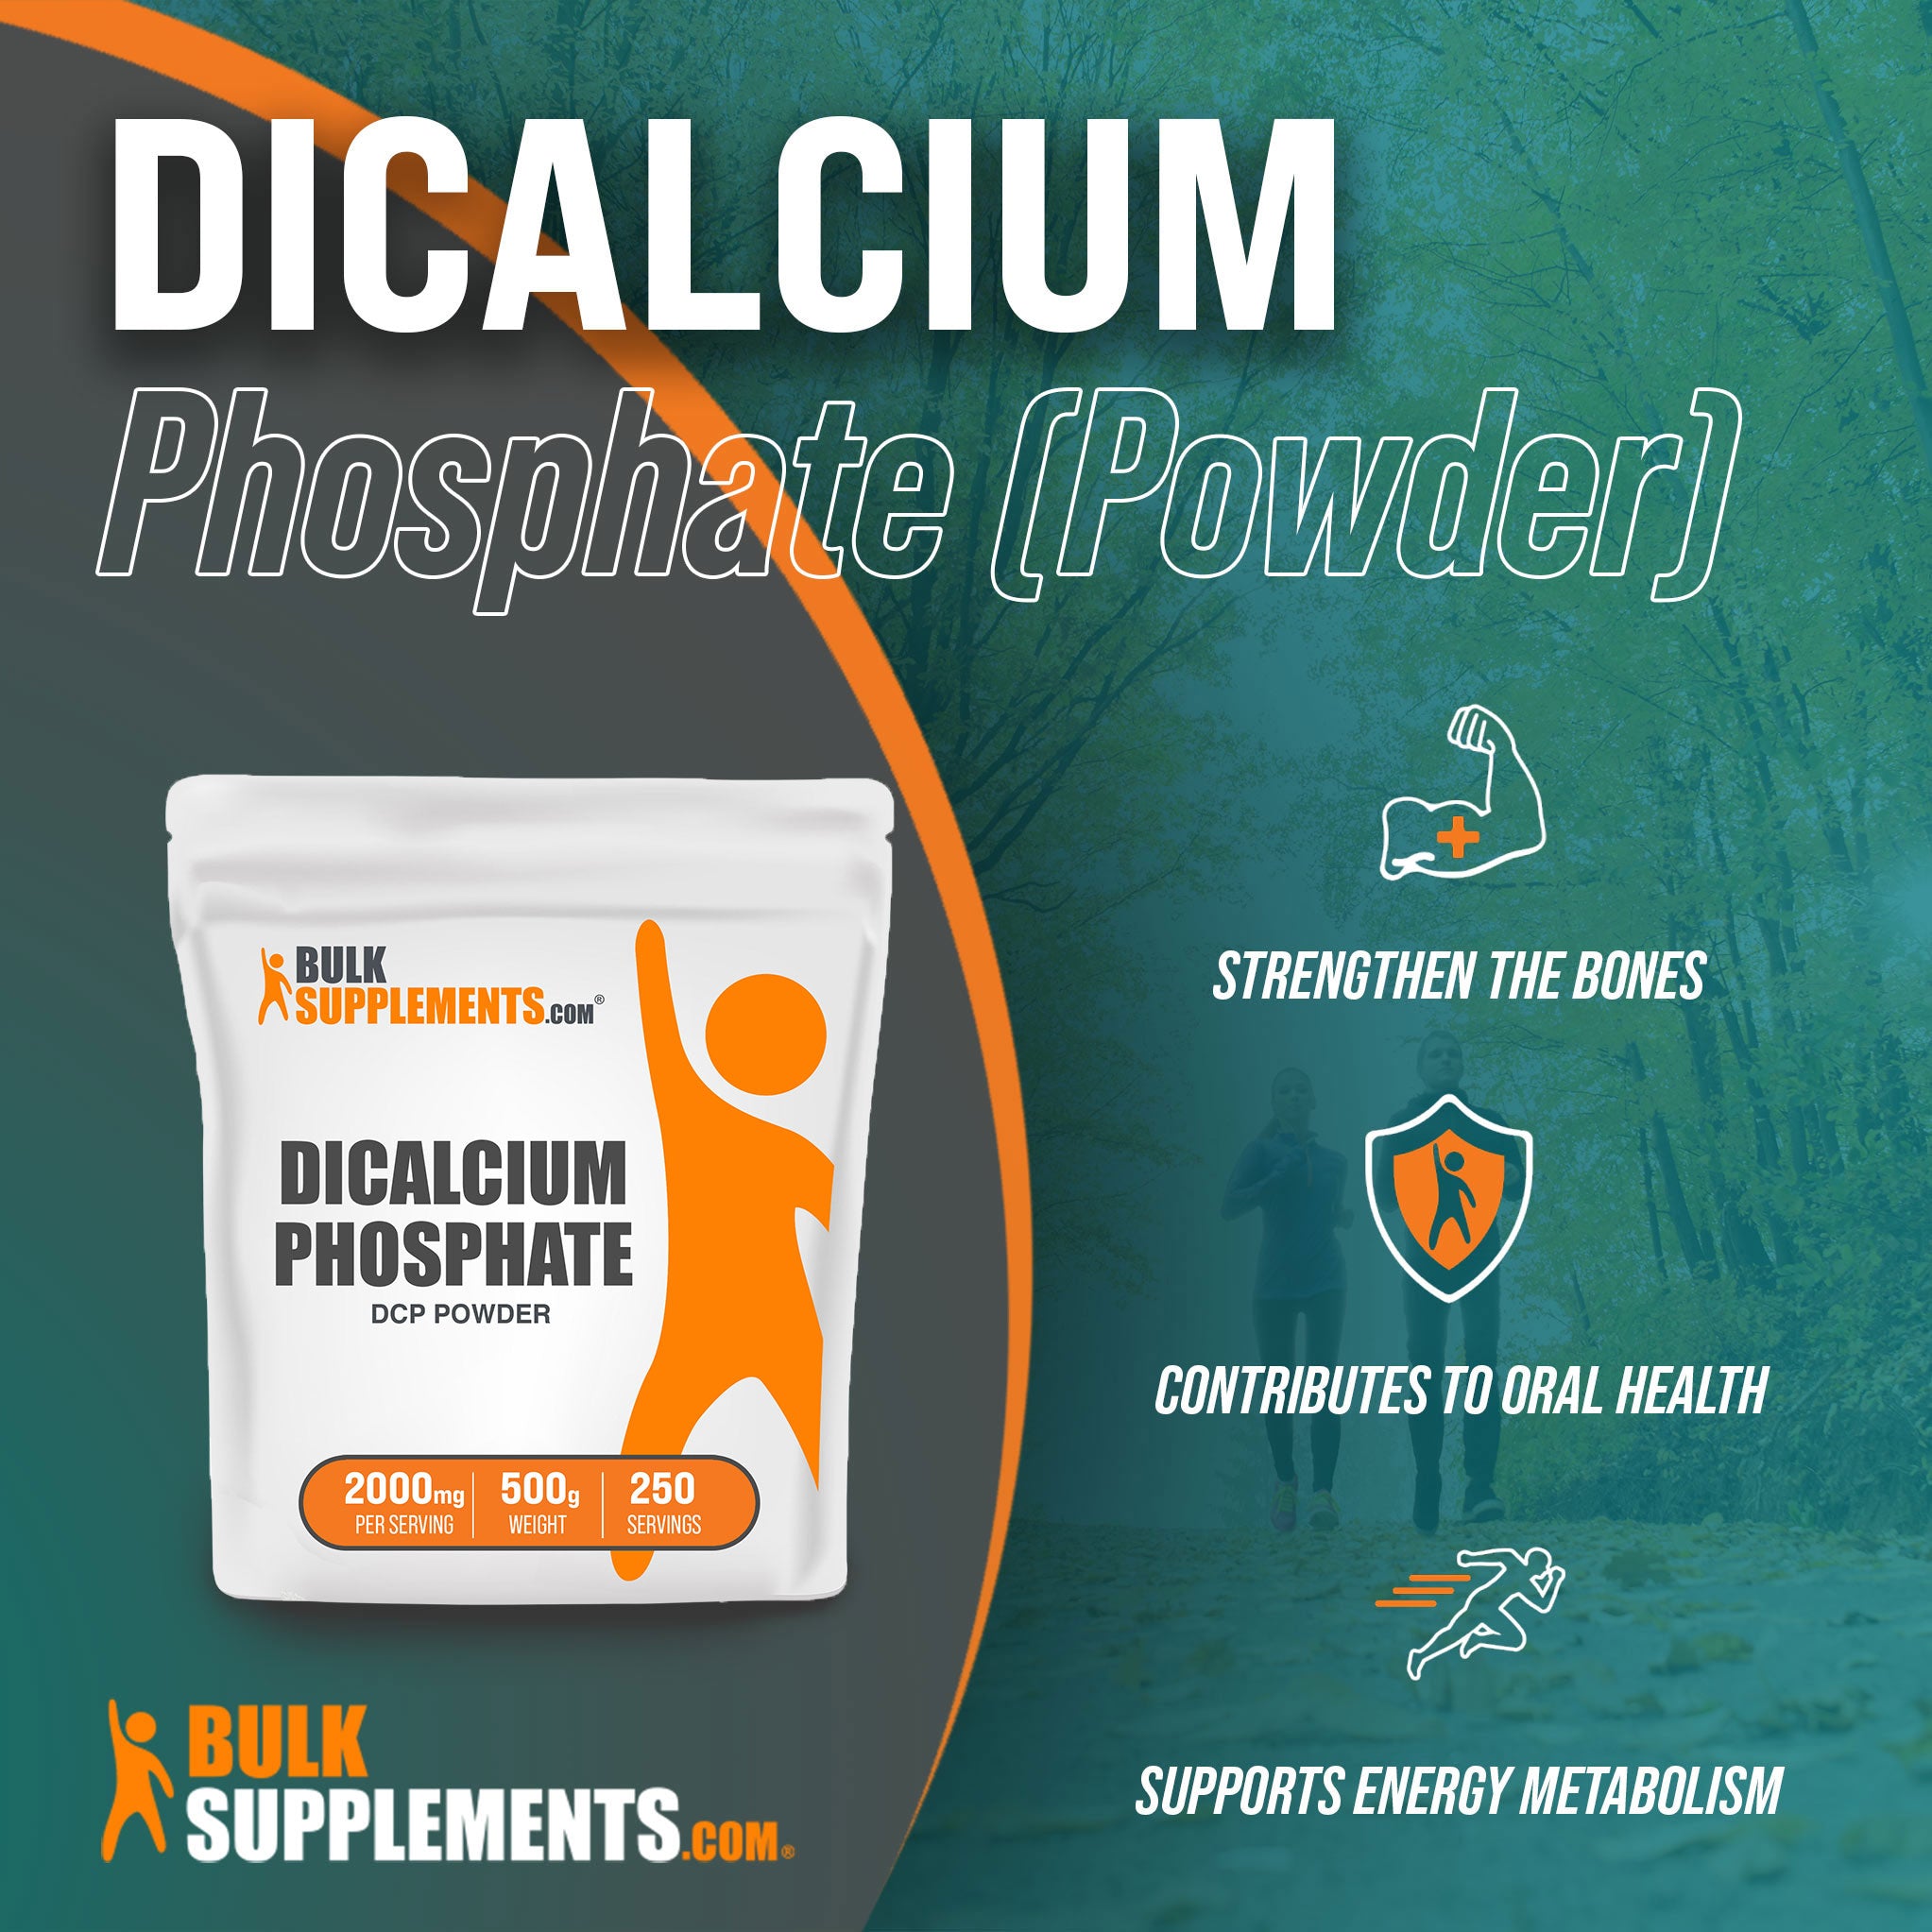 Benefits of DCP (Dicalcium Phosphate); strengthen the bones, contributes to oral health, supports energy metabolism